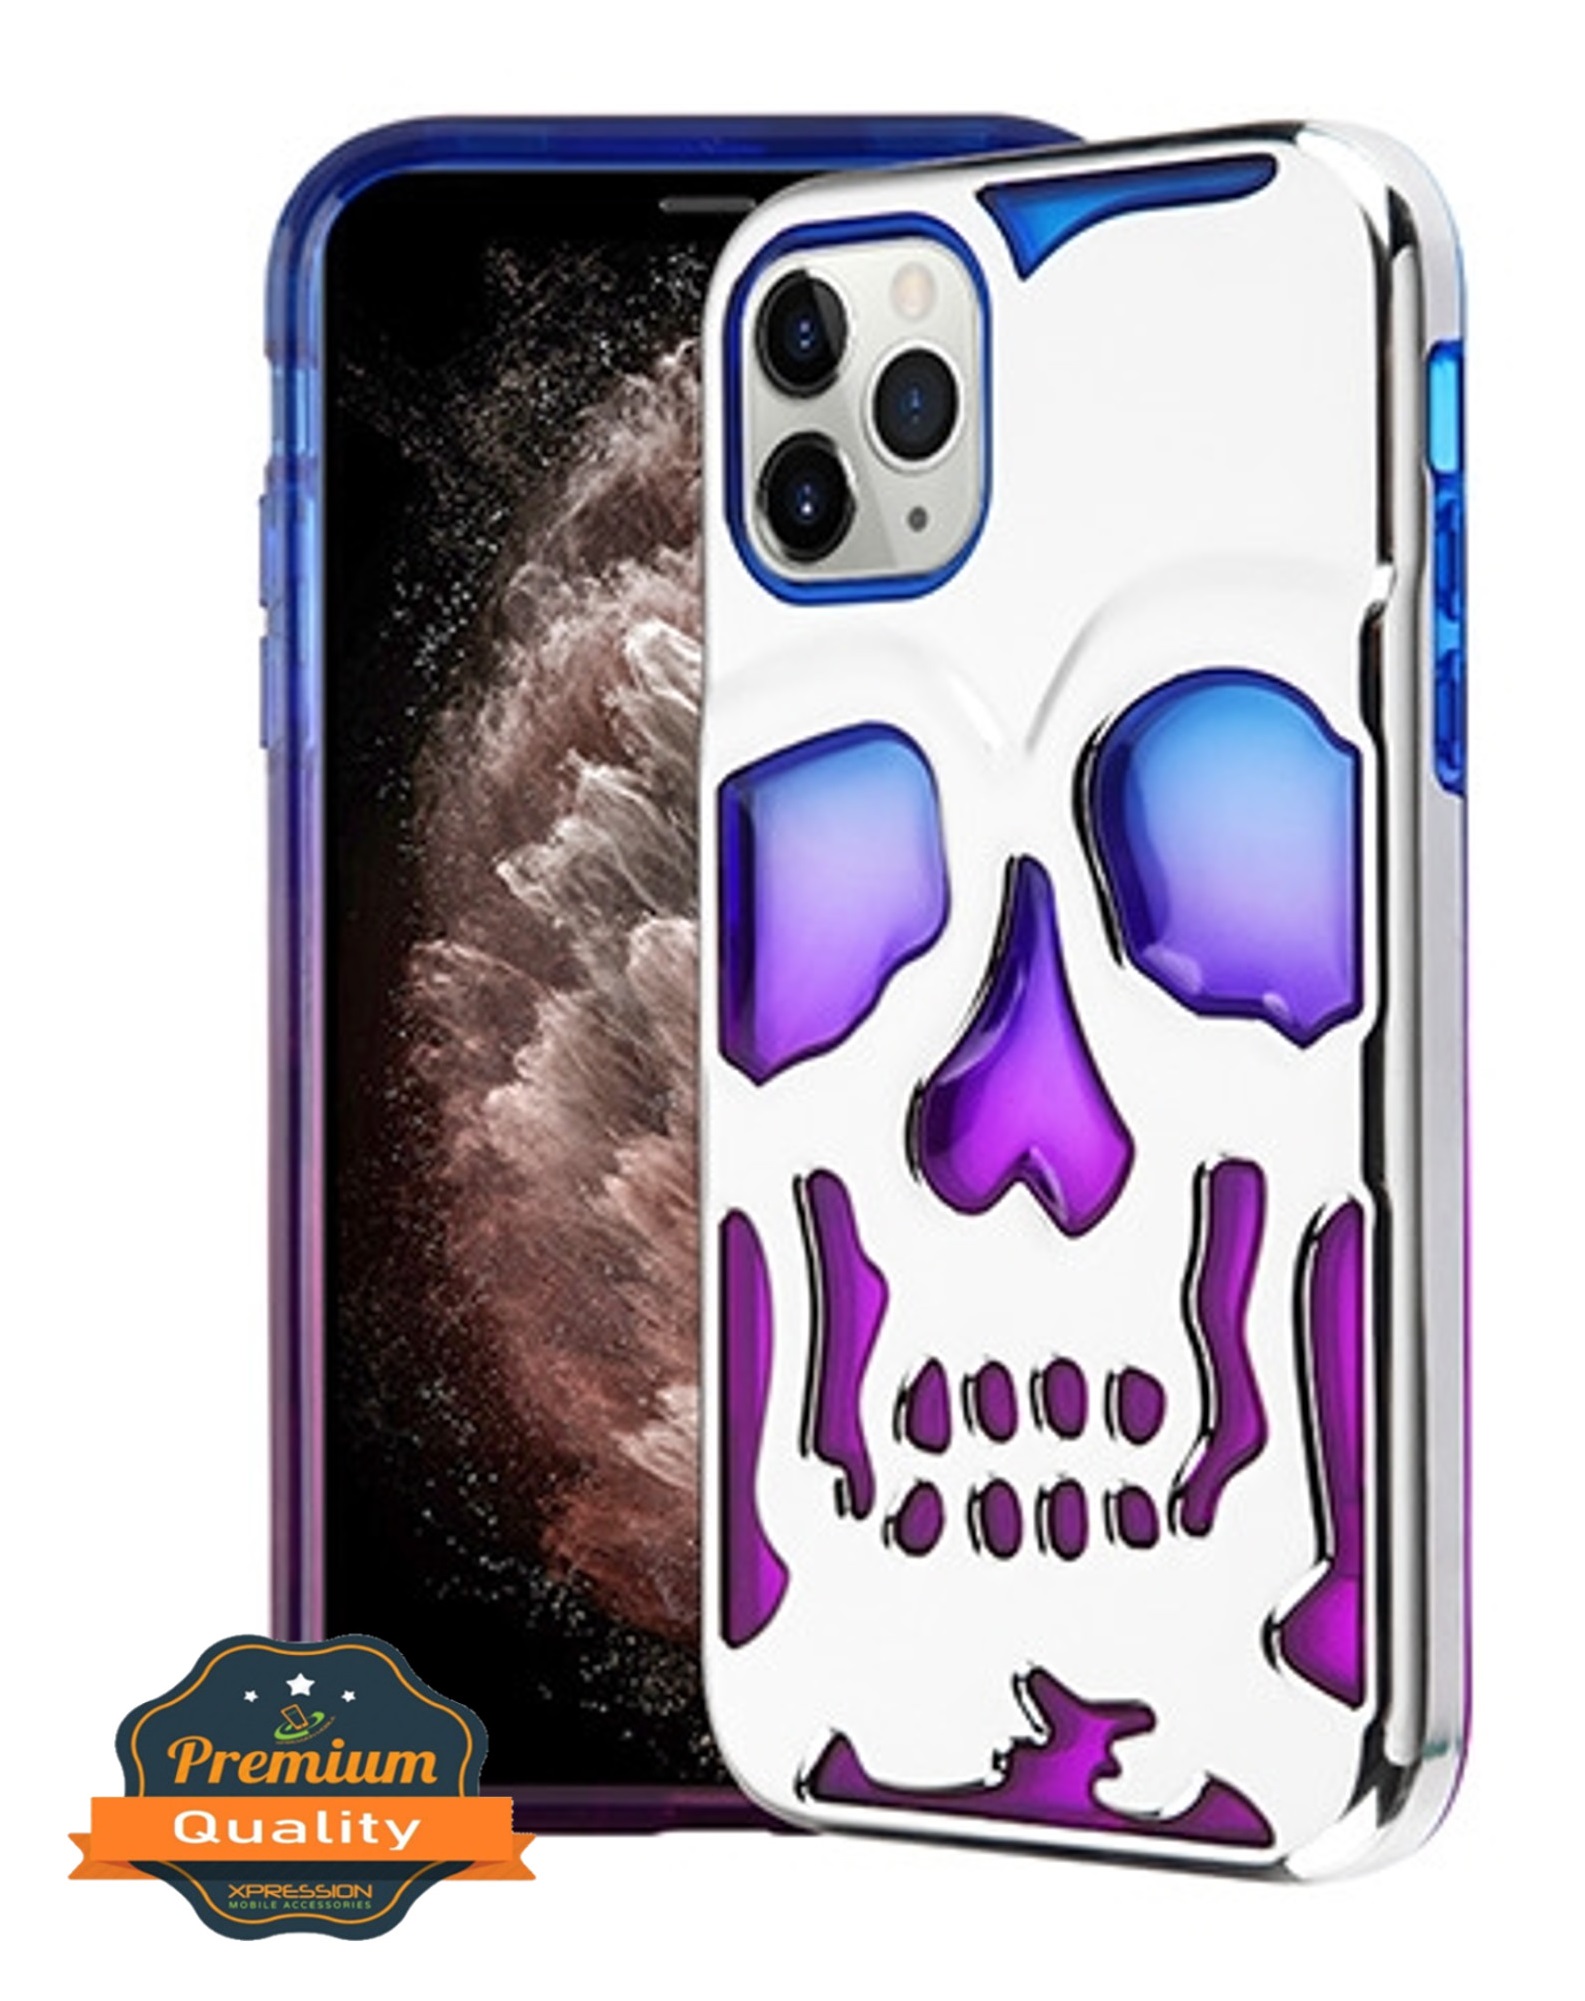 Apple iPhone 11 PRO Phone Case Tuff Hybrid Skeleton Shockproof Armor Impact Rubber Dual Layer Hard Soft TPU Rugged Protective Cover SKULL Blue Purple Silver Plating Phone Cover for Apple iPhone 11 Pro - image 1 of 5